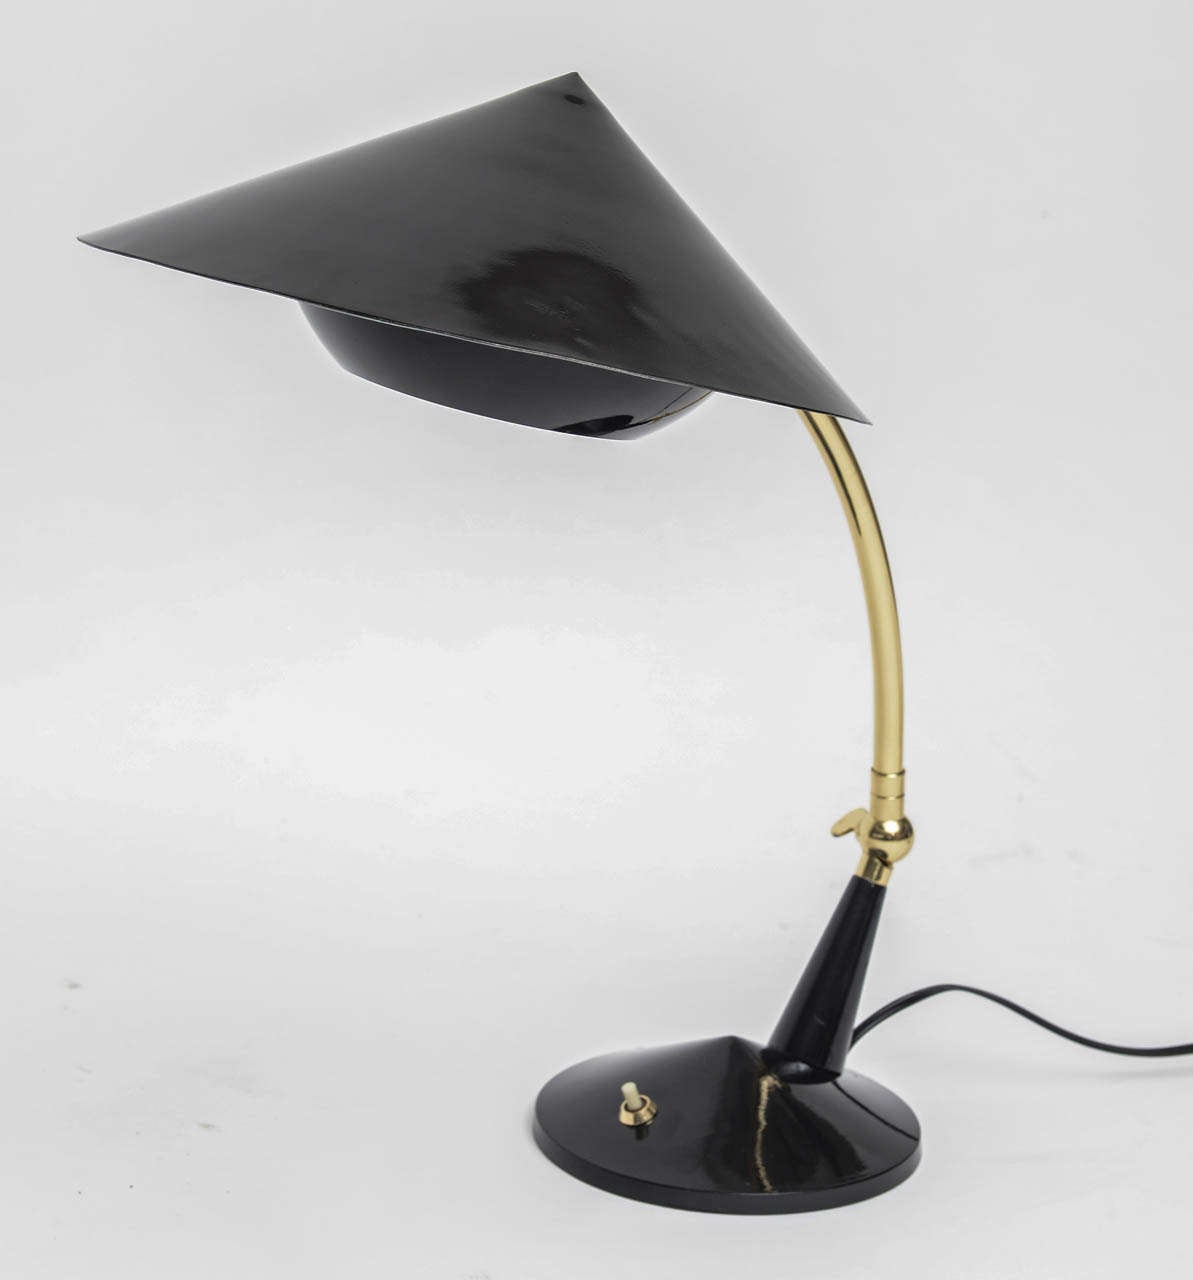 Adjustable 60's Italian desk lamp has reticulated, polished brass arm, black metal shade and diffuser, and black plastic base. Re-wired.